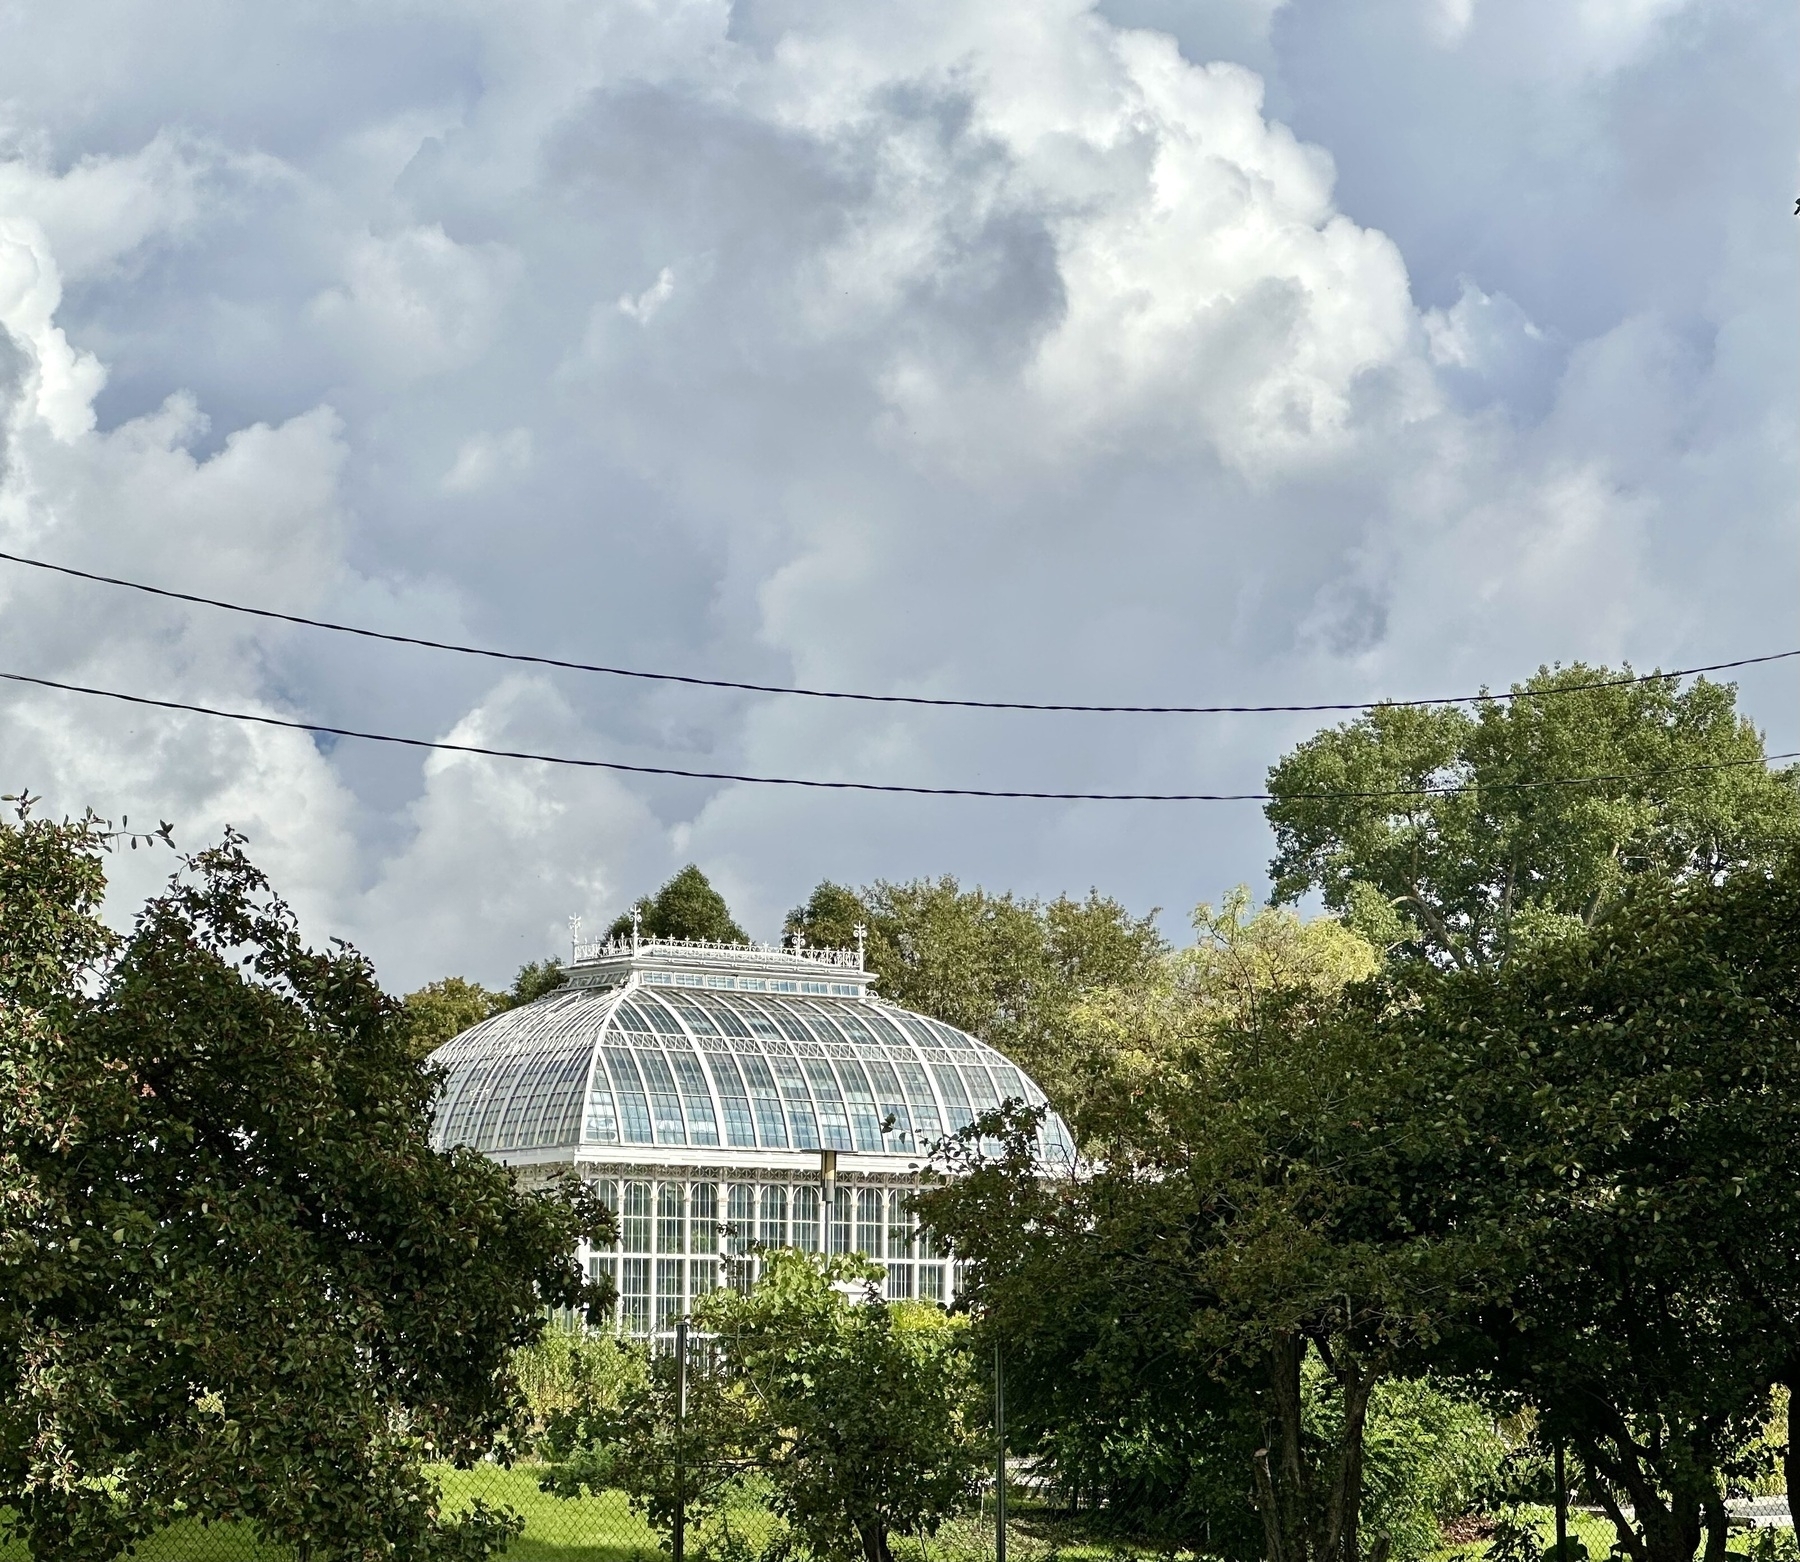 A glasshouse behind some trees, below a cloudy sky.